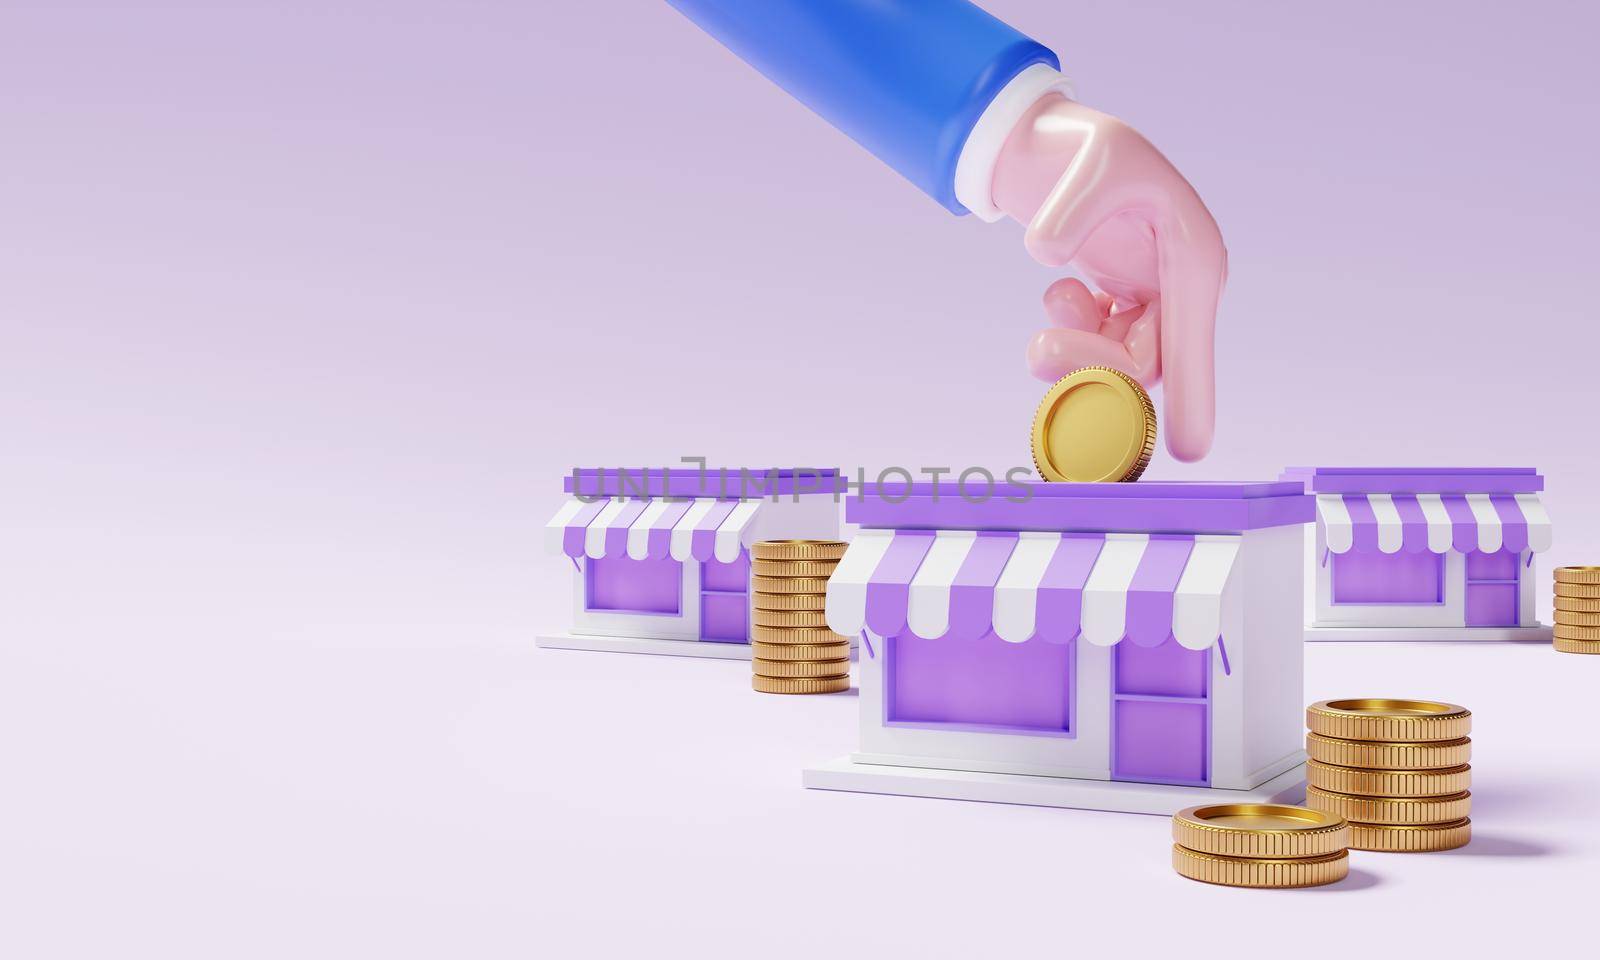 Collect money from a start-up business mini-mart that owns a business with businessman hand as an entrepreneur. Financial economy e-commerce and money-saving money concept. 3D illustration rendering by MiniStocker